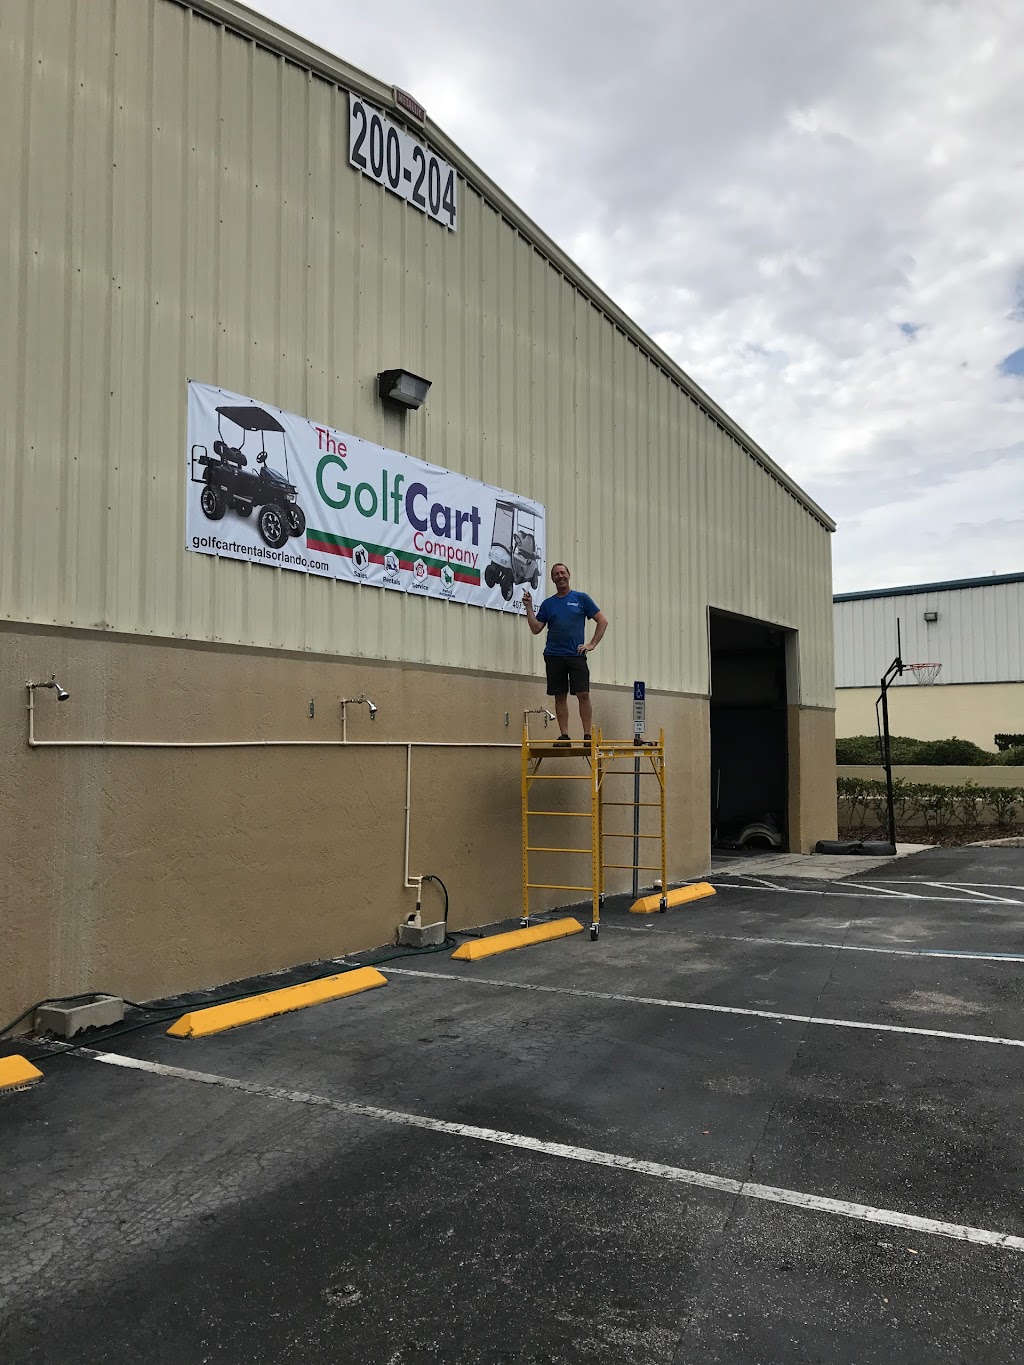 The Golf Cart Company | 13649 Granville Ave, Clermont, FL 34711, USA | Phone: (407) 557-2775